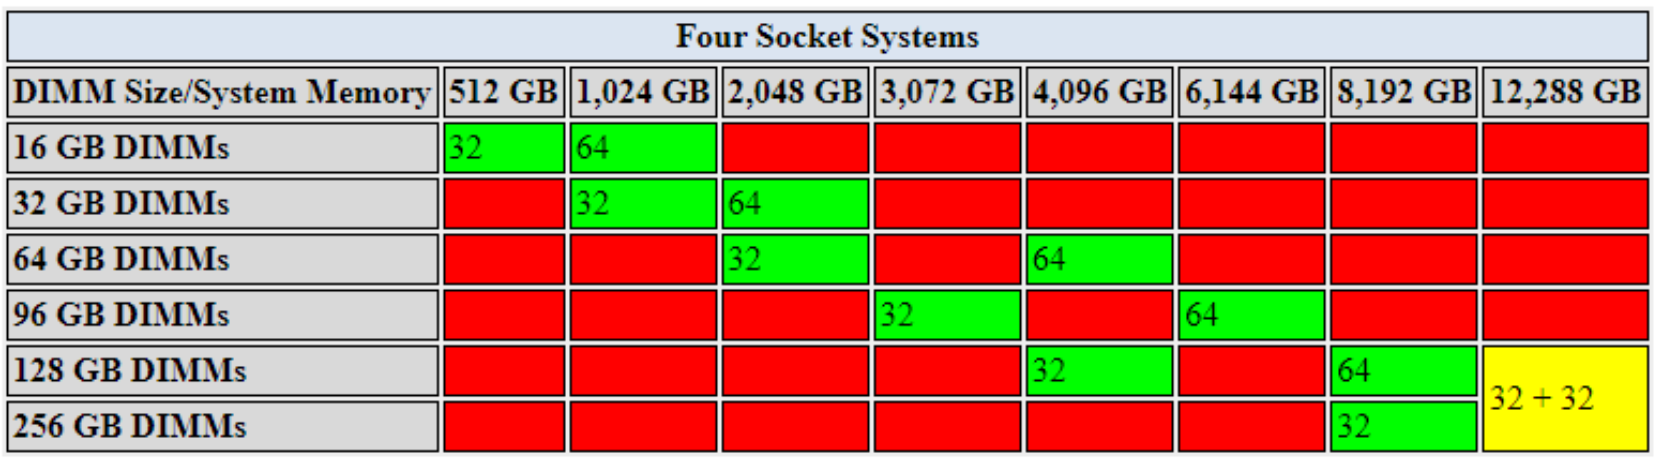 Shows supported DIMM/memory configuration for four-socket 4th Generation servers